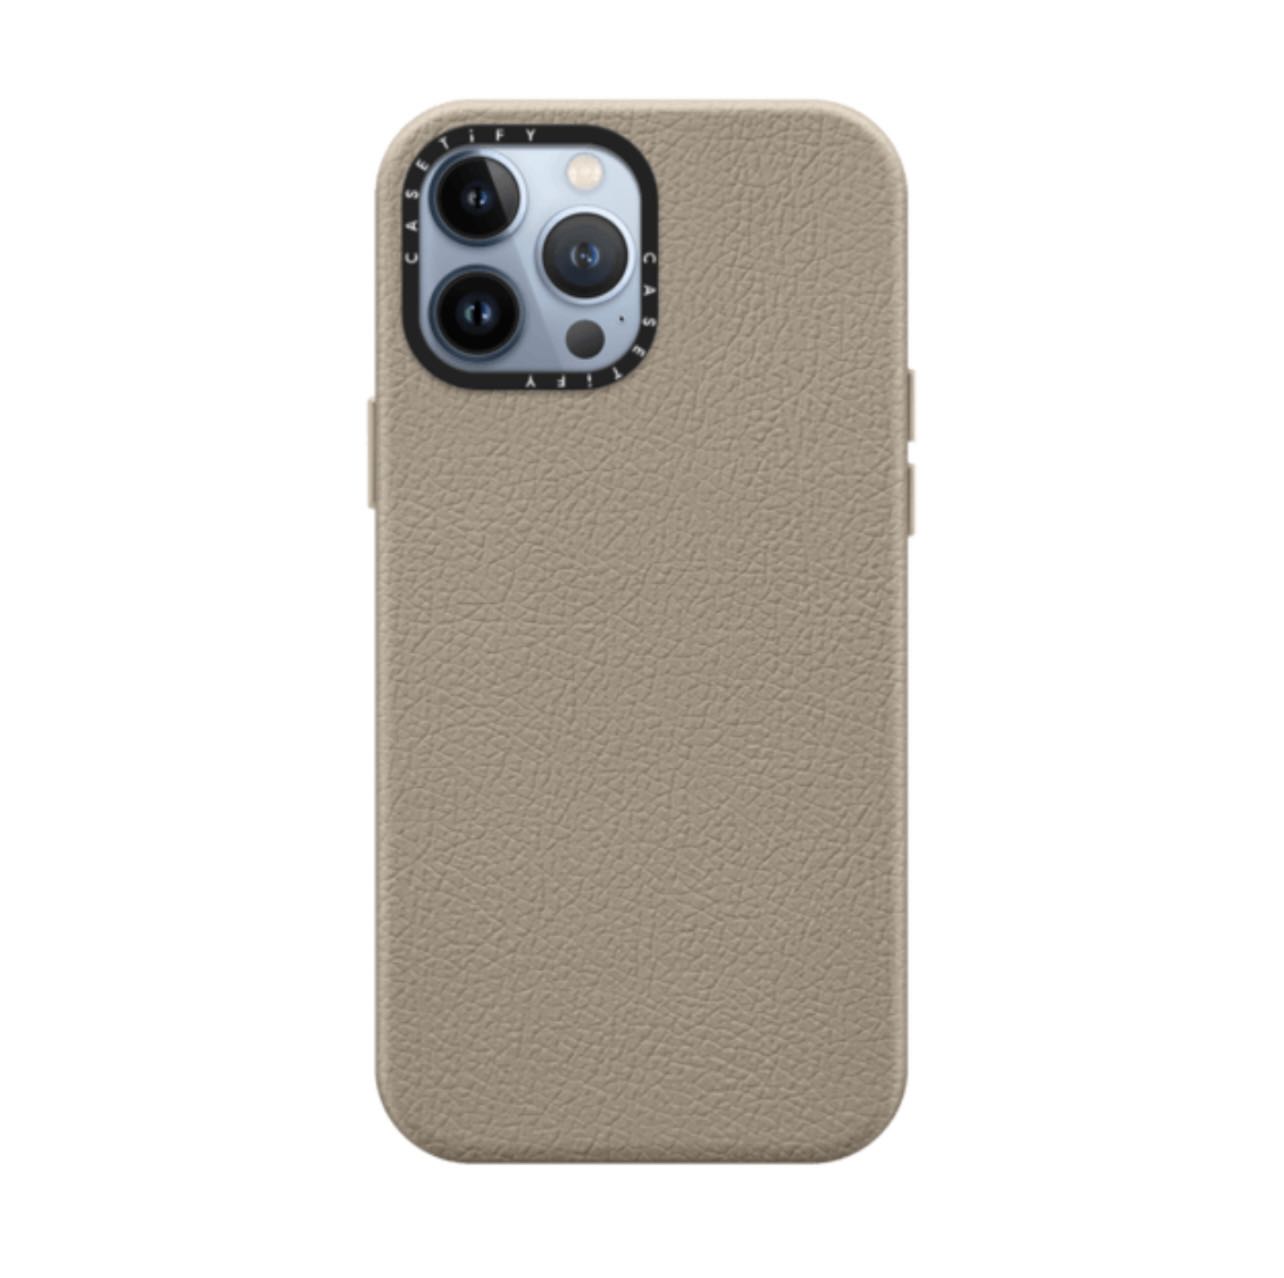 [BNIB] Casetify iPhone 13 Pro Max Leather Case - Greige - MagSafe ...